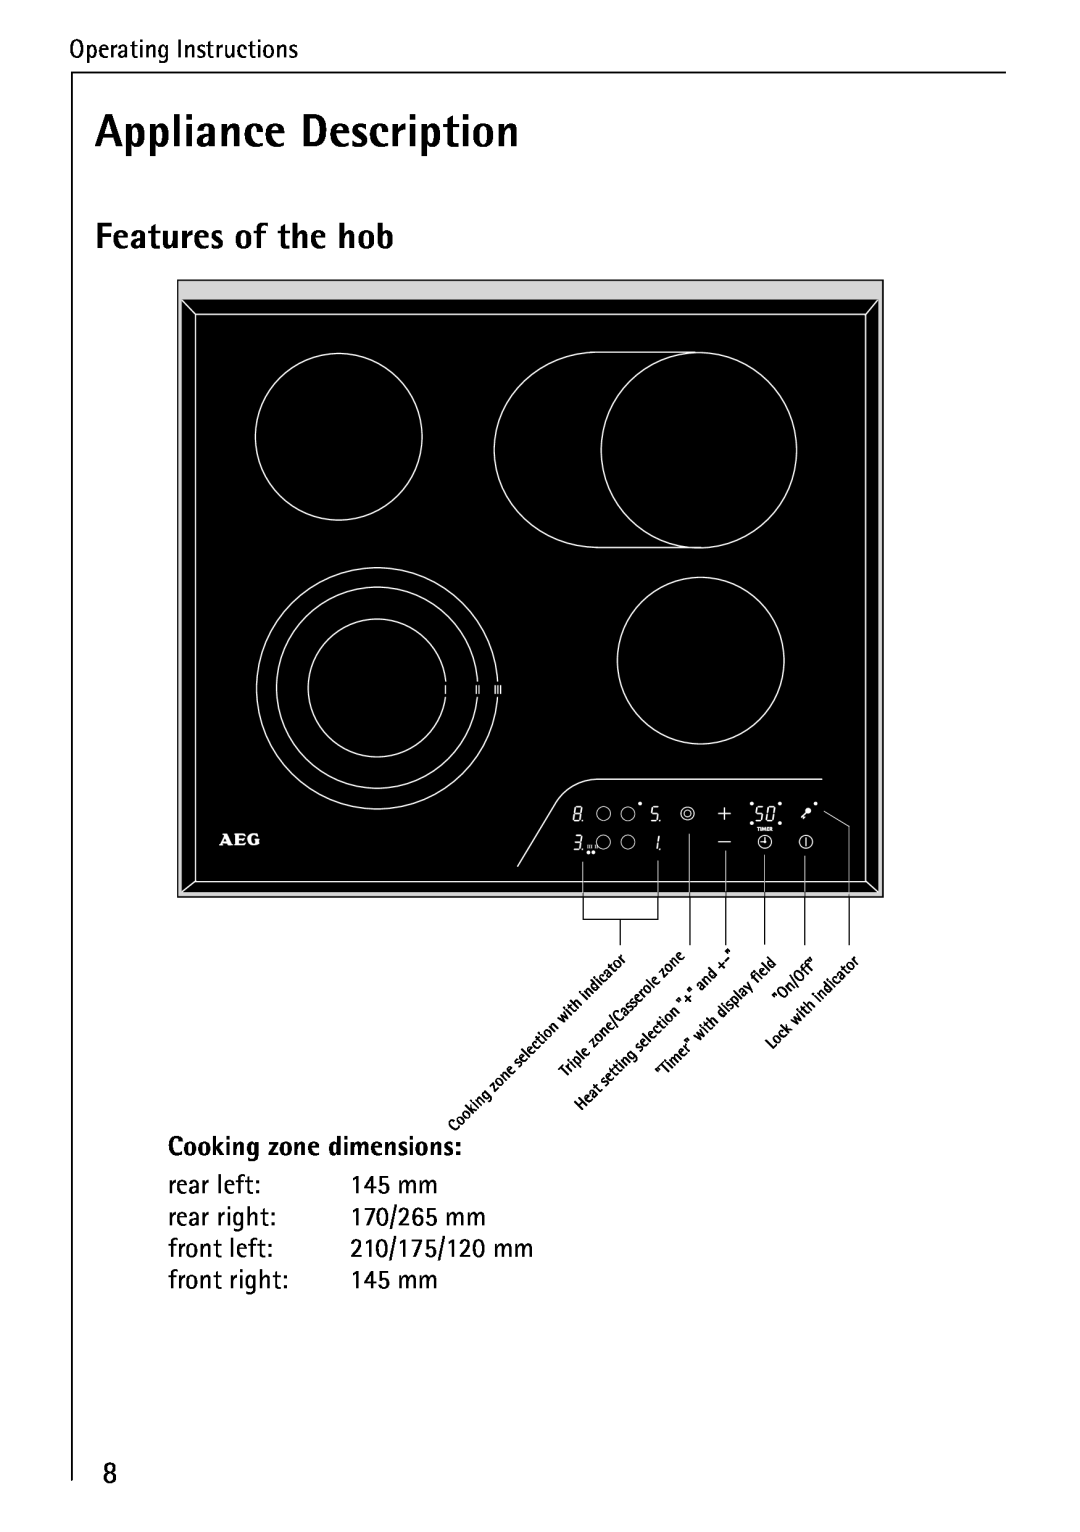 Electrolux 65300KF-an operating instructions Appliance Description, Features of the hob 